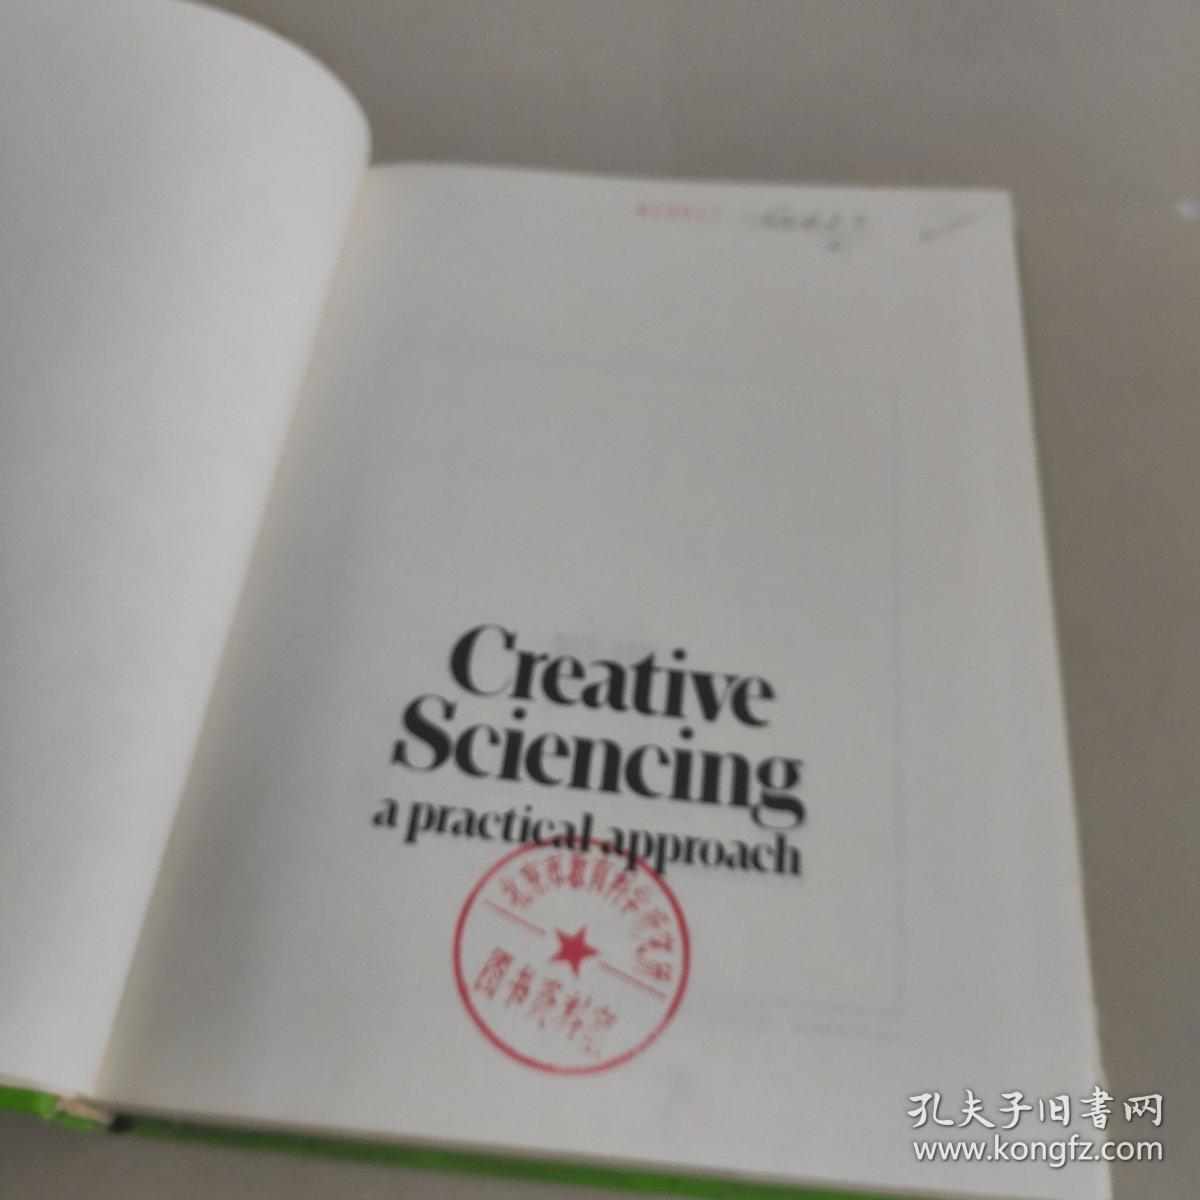 CREATIVE SCIENCING APRACTICAL APPROACH SECOND EDITION创造性科学理论方法第二版